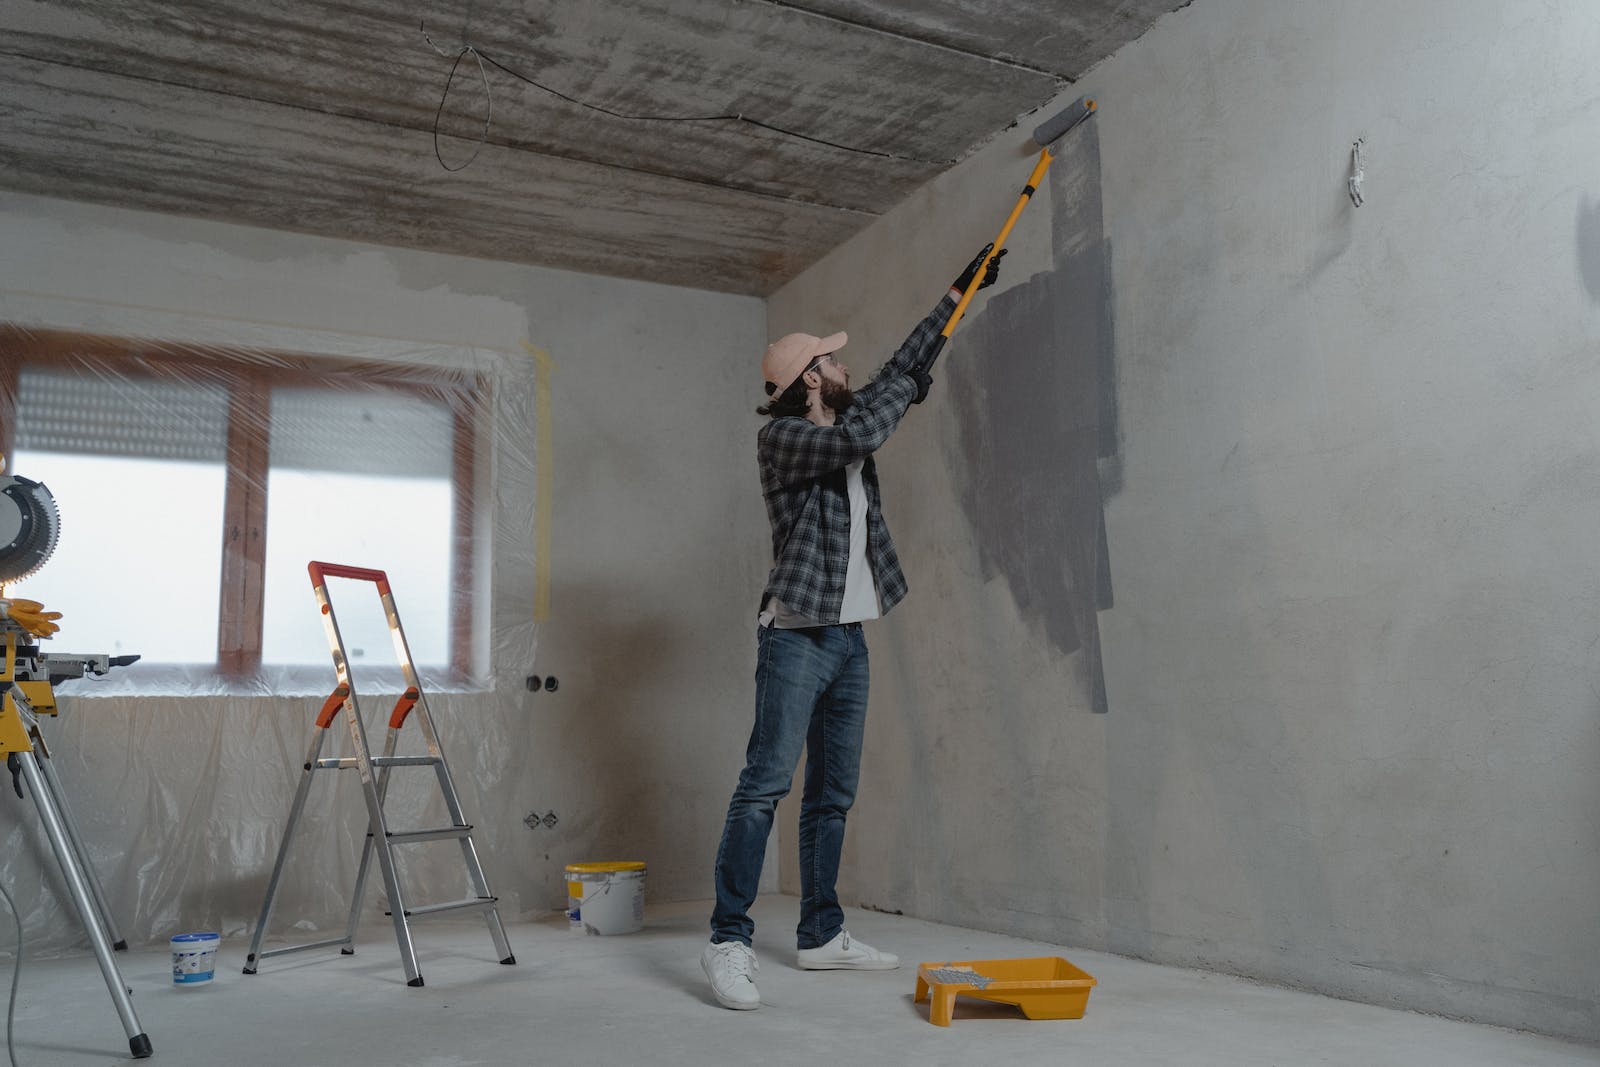 Bunbury Painting Service: Transforming Spaces with Professional Painting in Perth